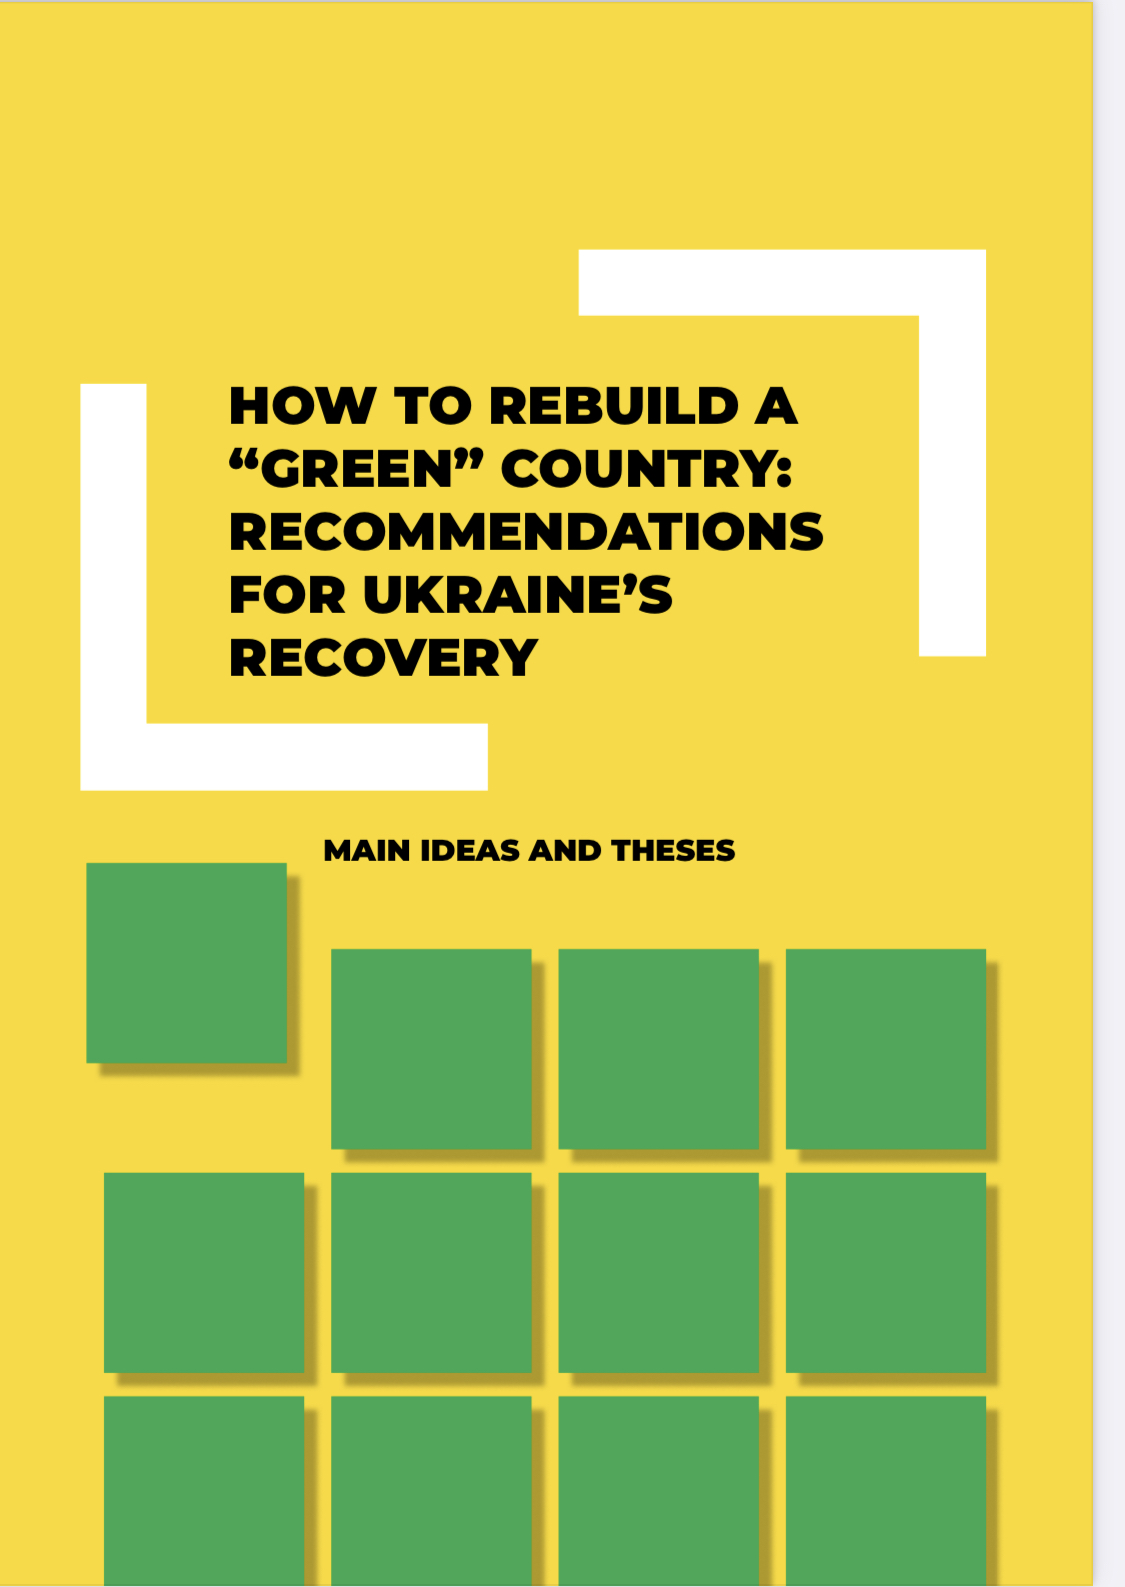 How to rebuild a “green” country: recommendations for Ukraine’s recovery